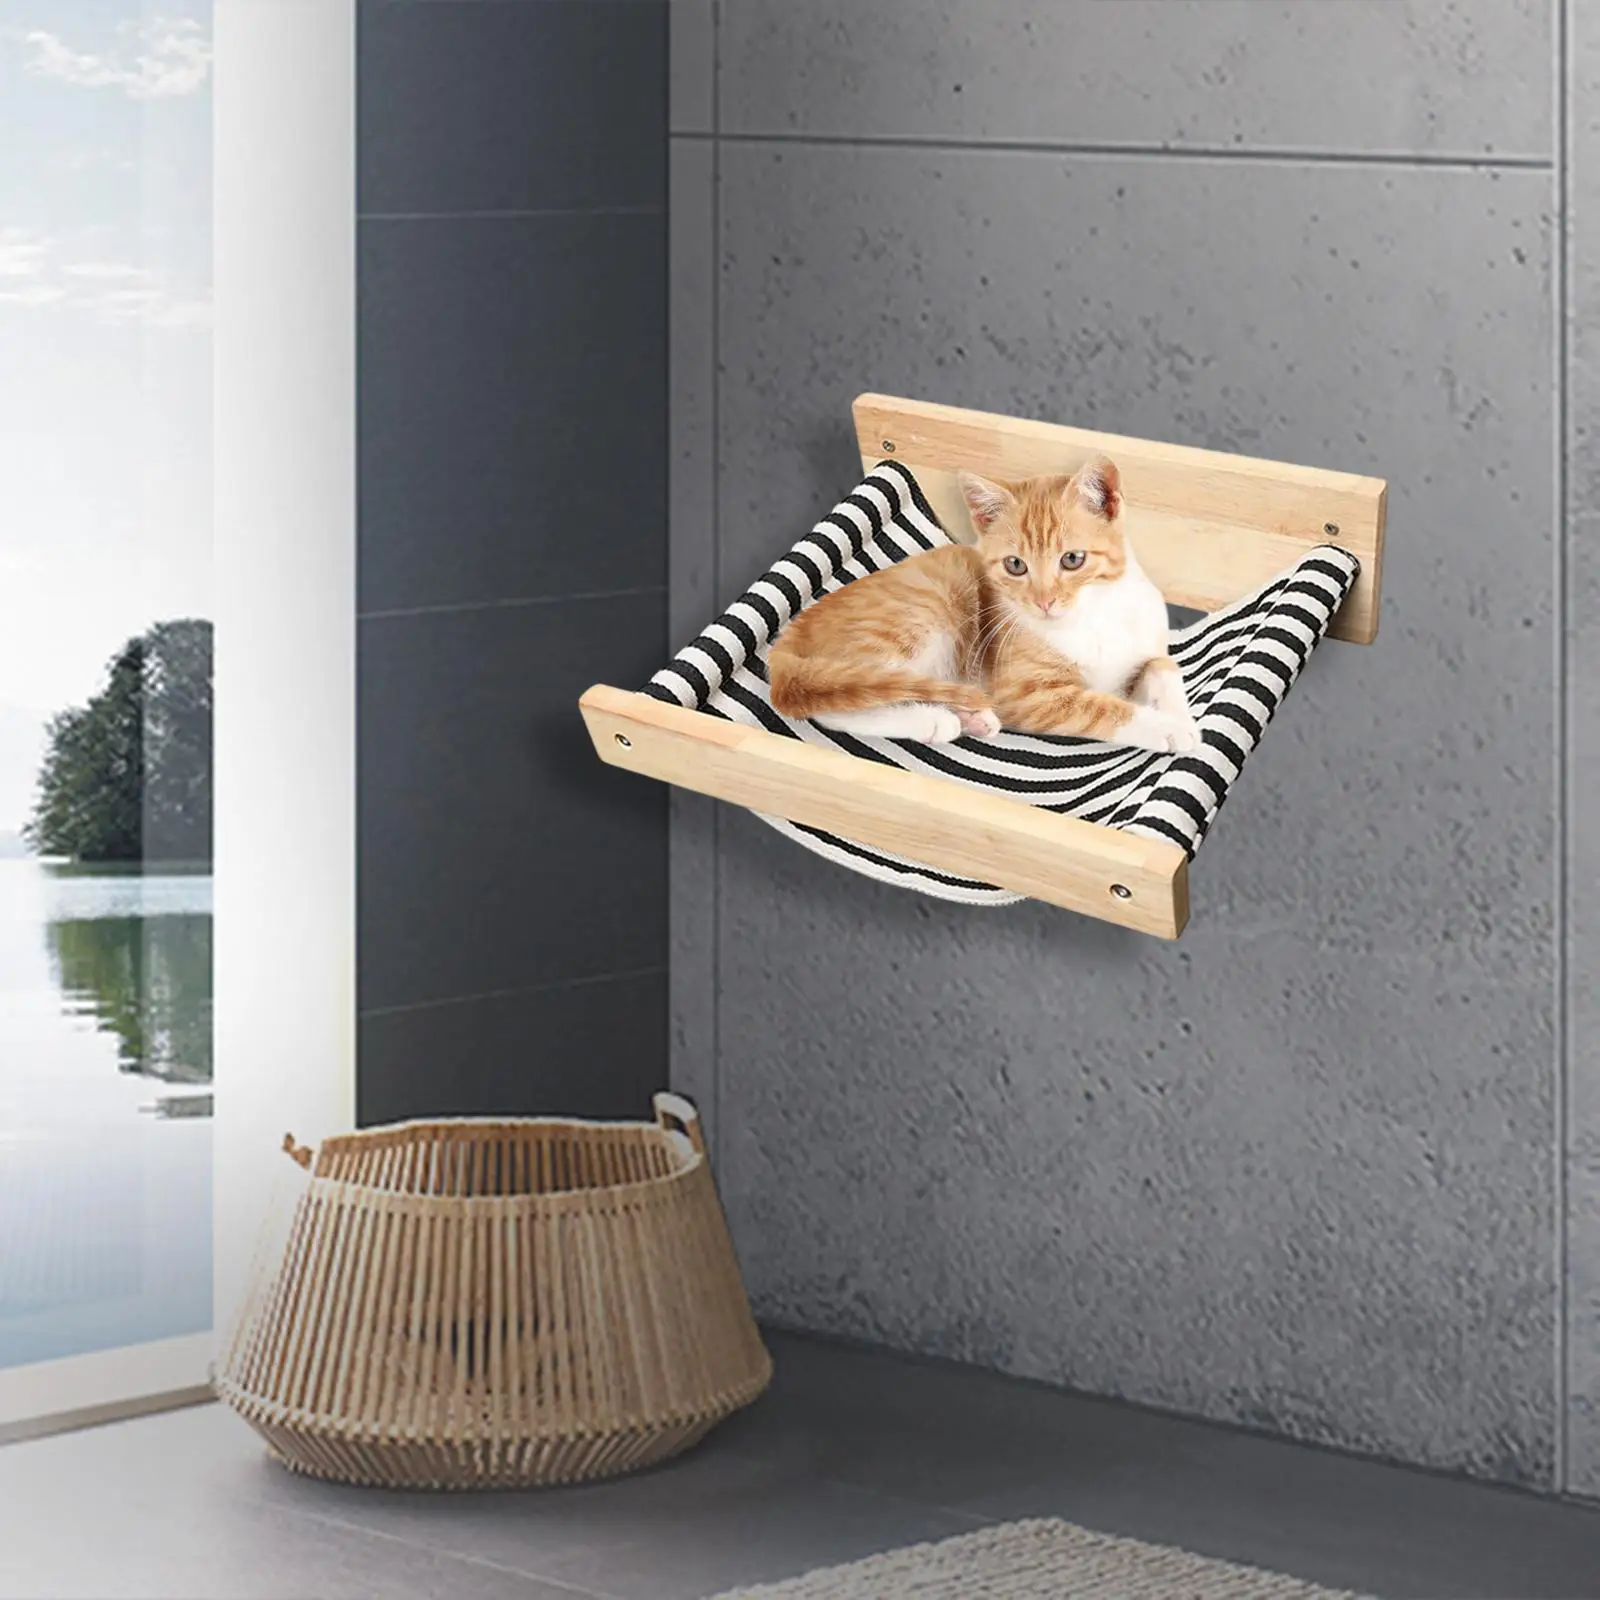 

Cat Hammock Wall Mounted Resting Seat Solid Modern Comfortable Playing for Indoor Cats Sleeping Kitty Beds Perches Pet Cat Bed